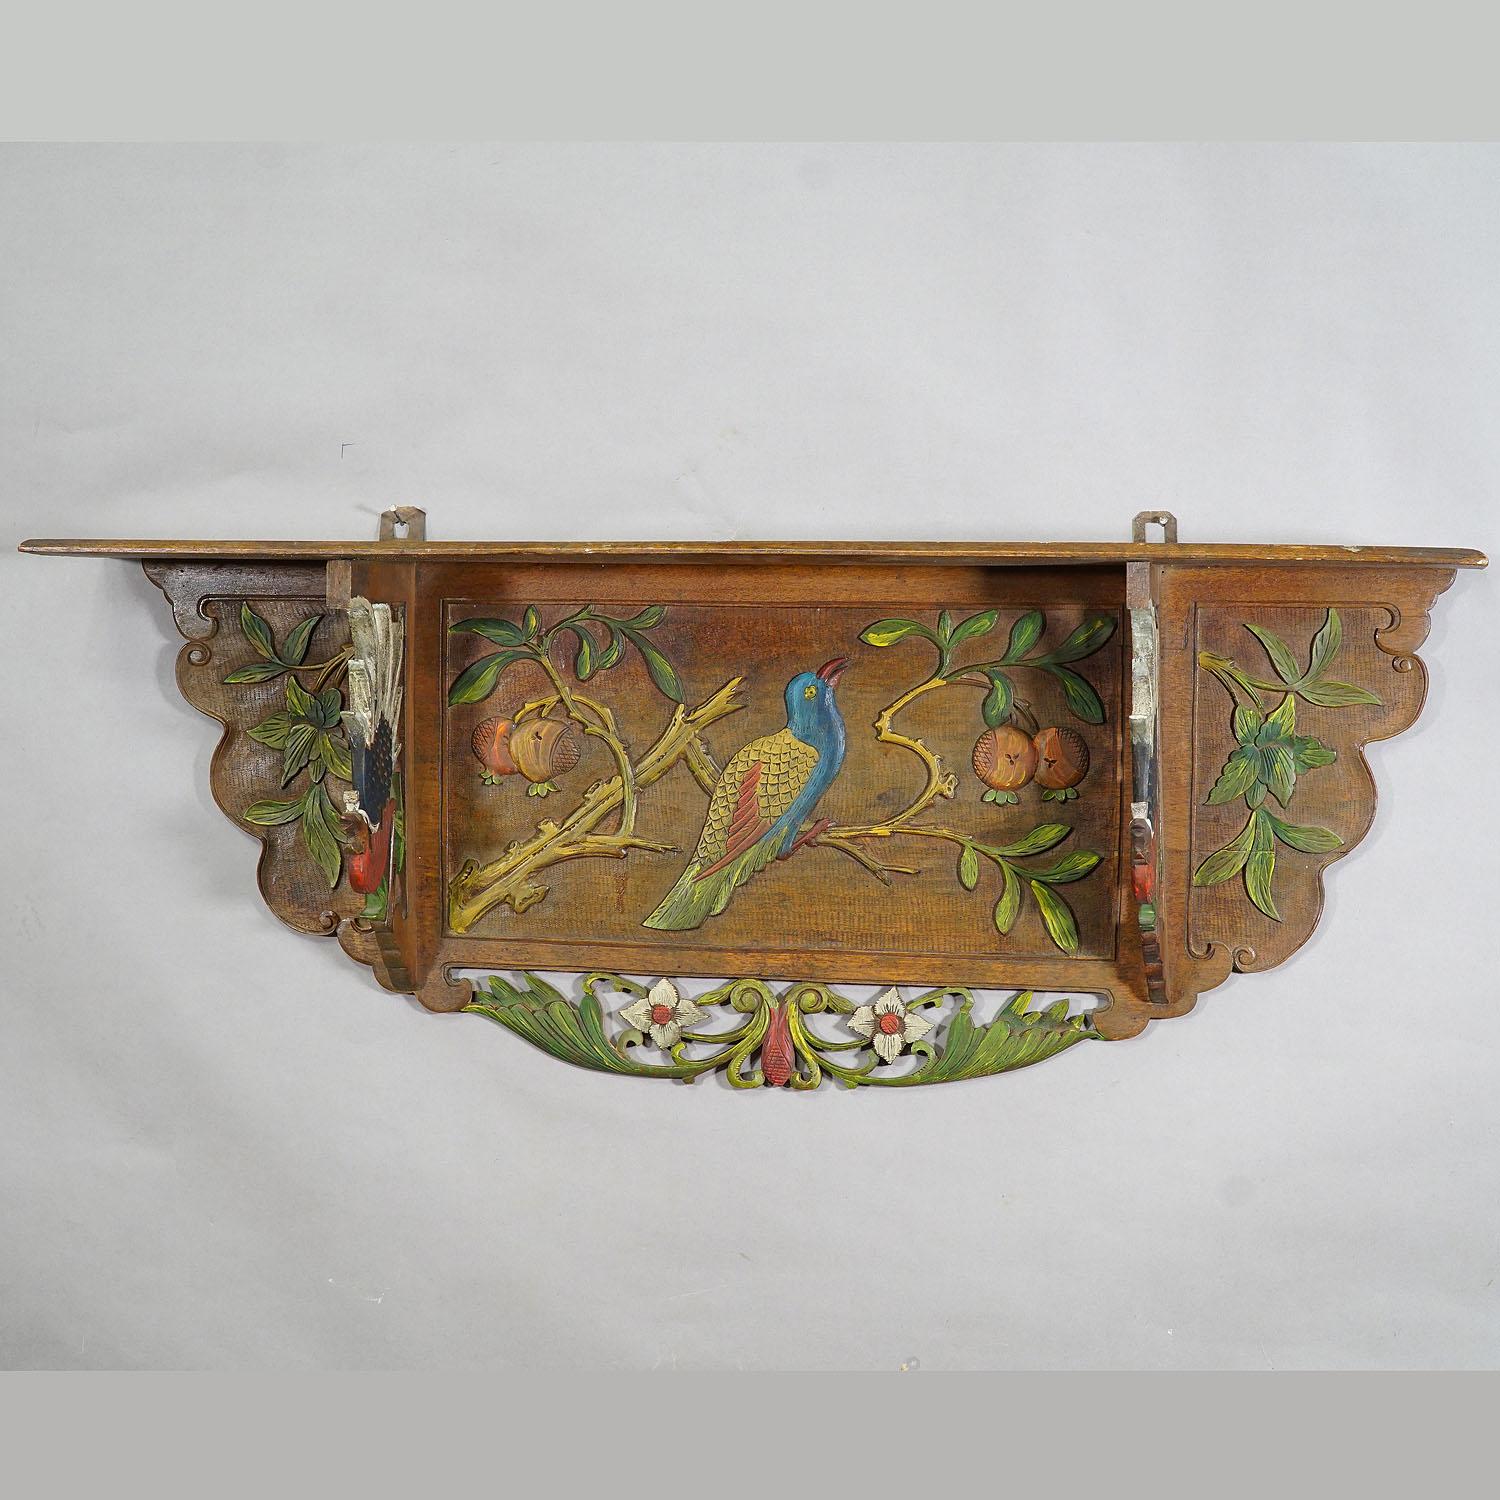 A great Victorian wooden shelve with detailed carvings depicting stylized foliage, fruits, flowers and birds. Hand carved and polychromic painted in Germany, circa 1920. Very good original condition and ready to hang-up.

Measures: Width 39.37